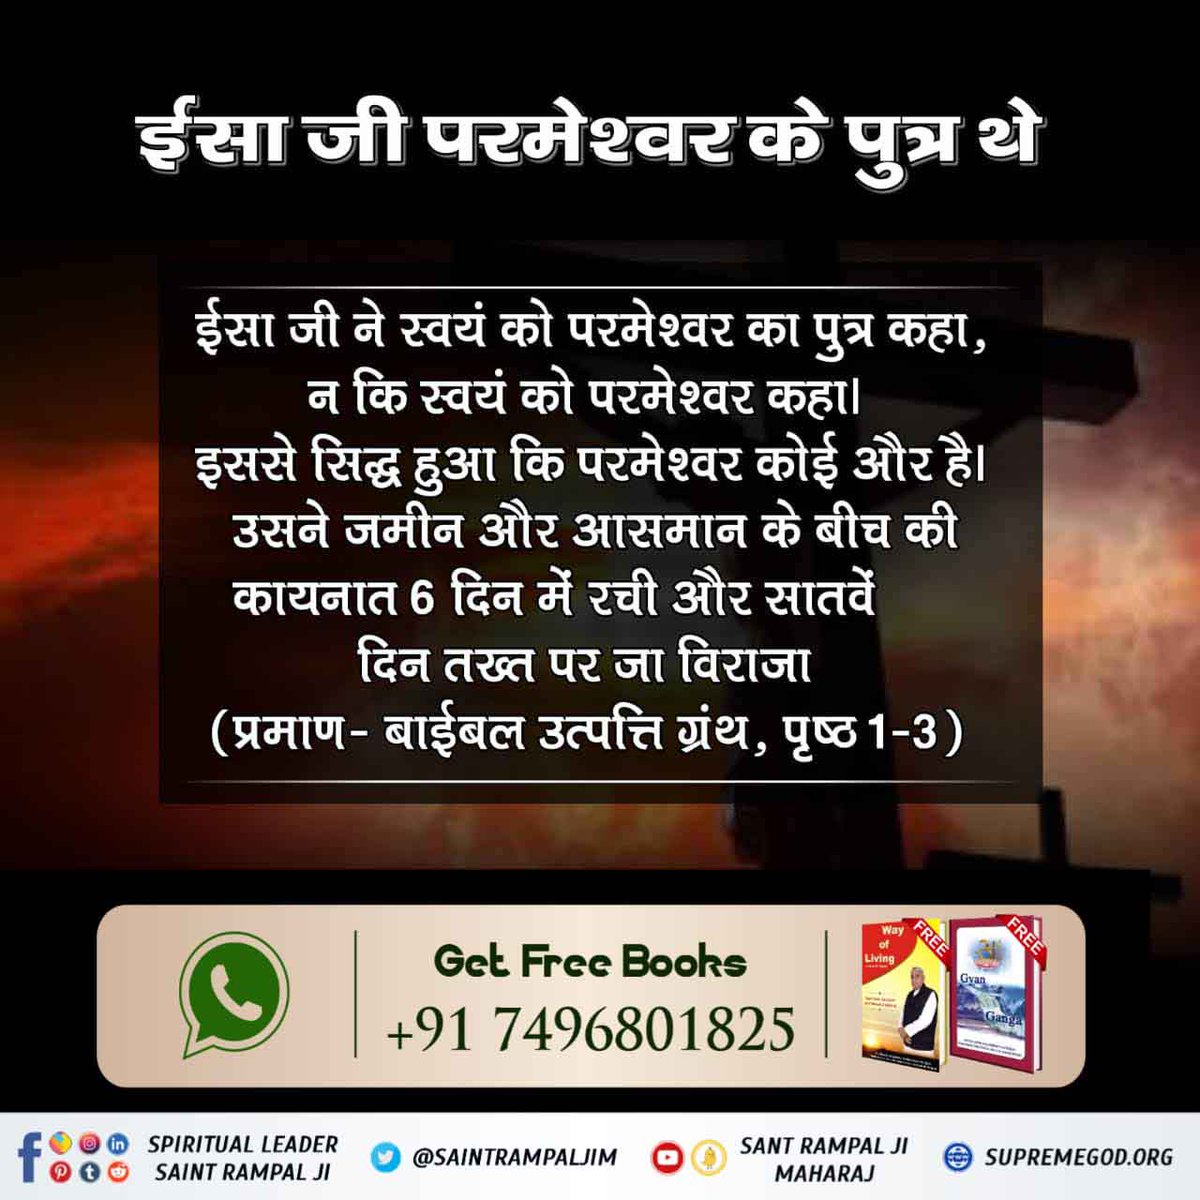 Holy Bible Genesis 1:27
#Facts_About_EasterSunday 
God created mankind in his own image, in the image of God he created them; male and female he created them.
God is not formless. This a baseless theory.
Holy Bible proves that God is in human form.
Kabir Is God